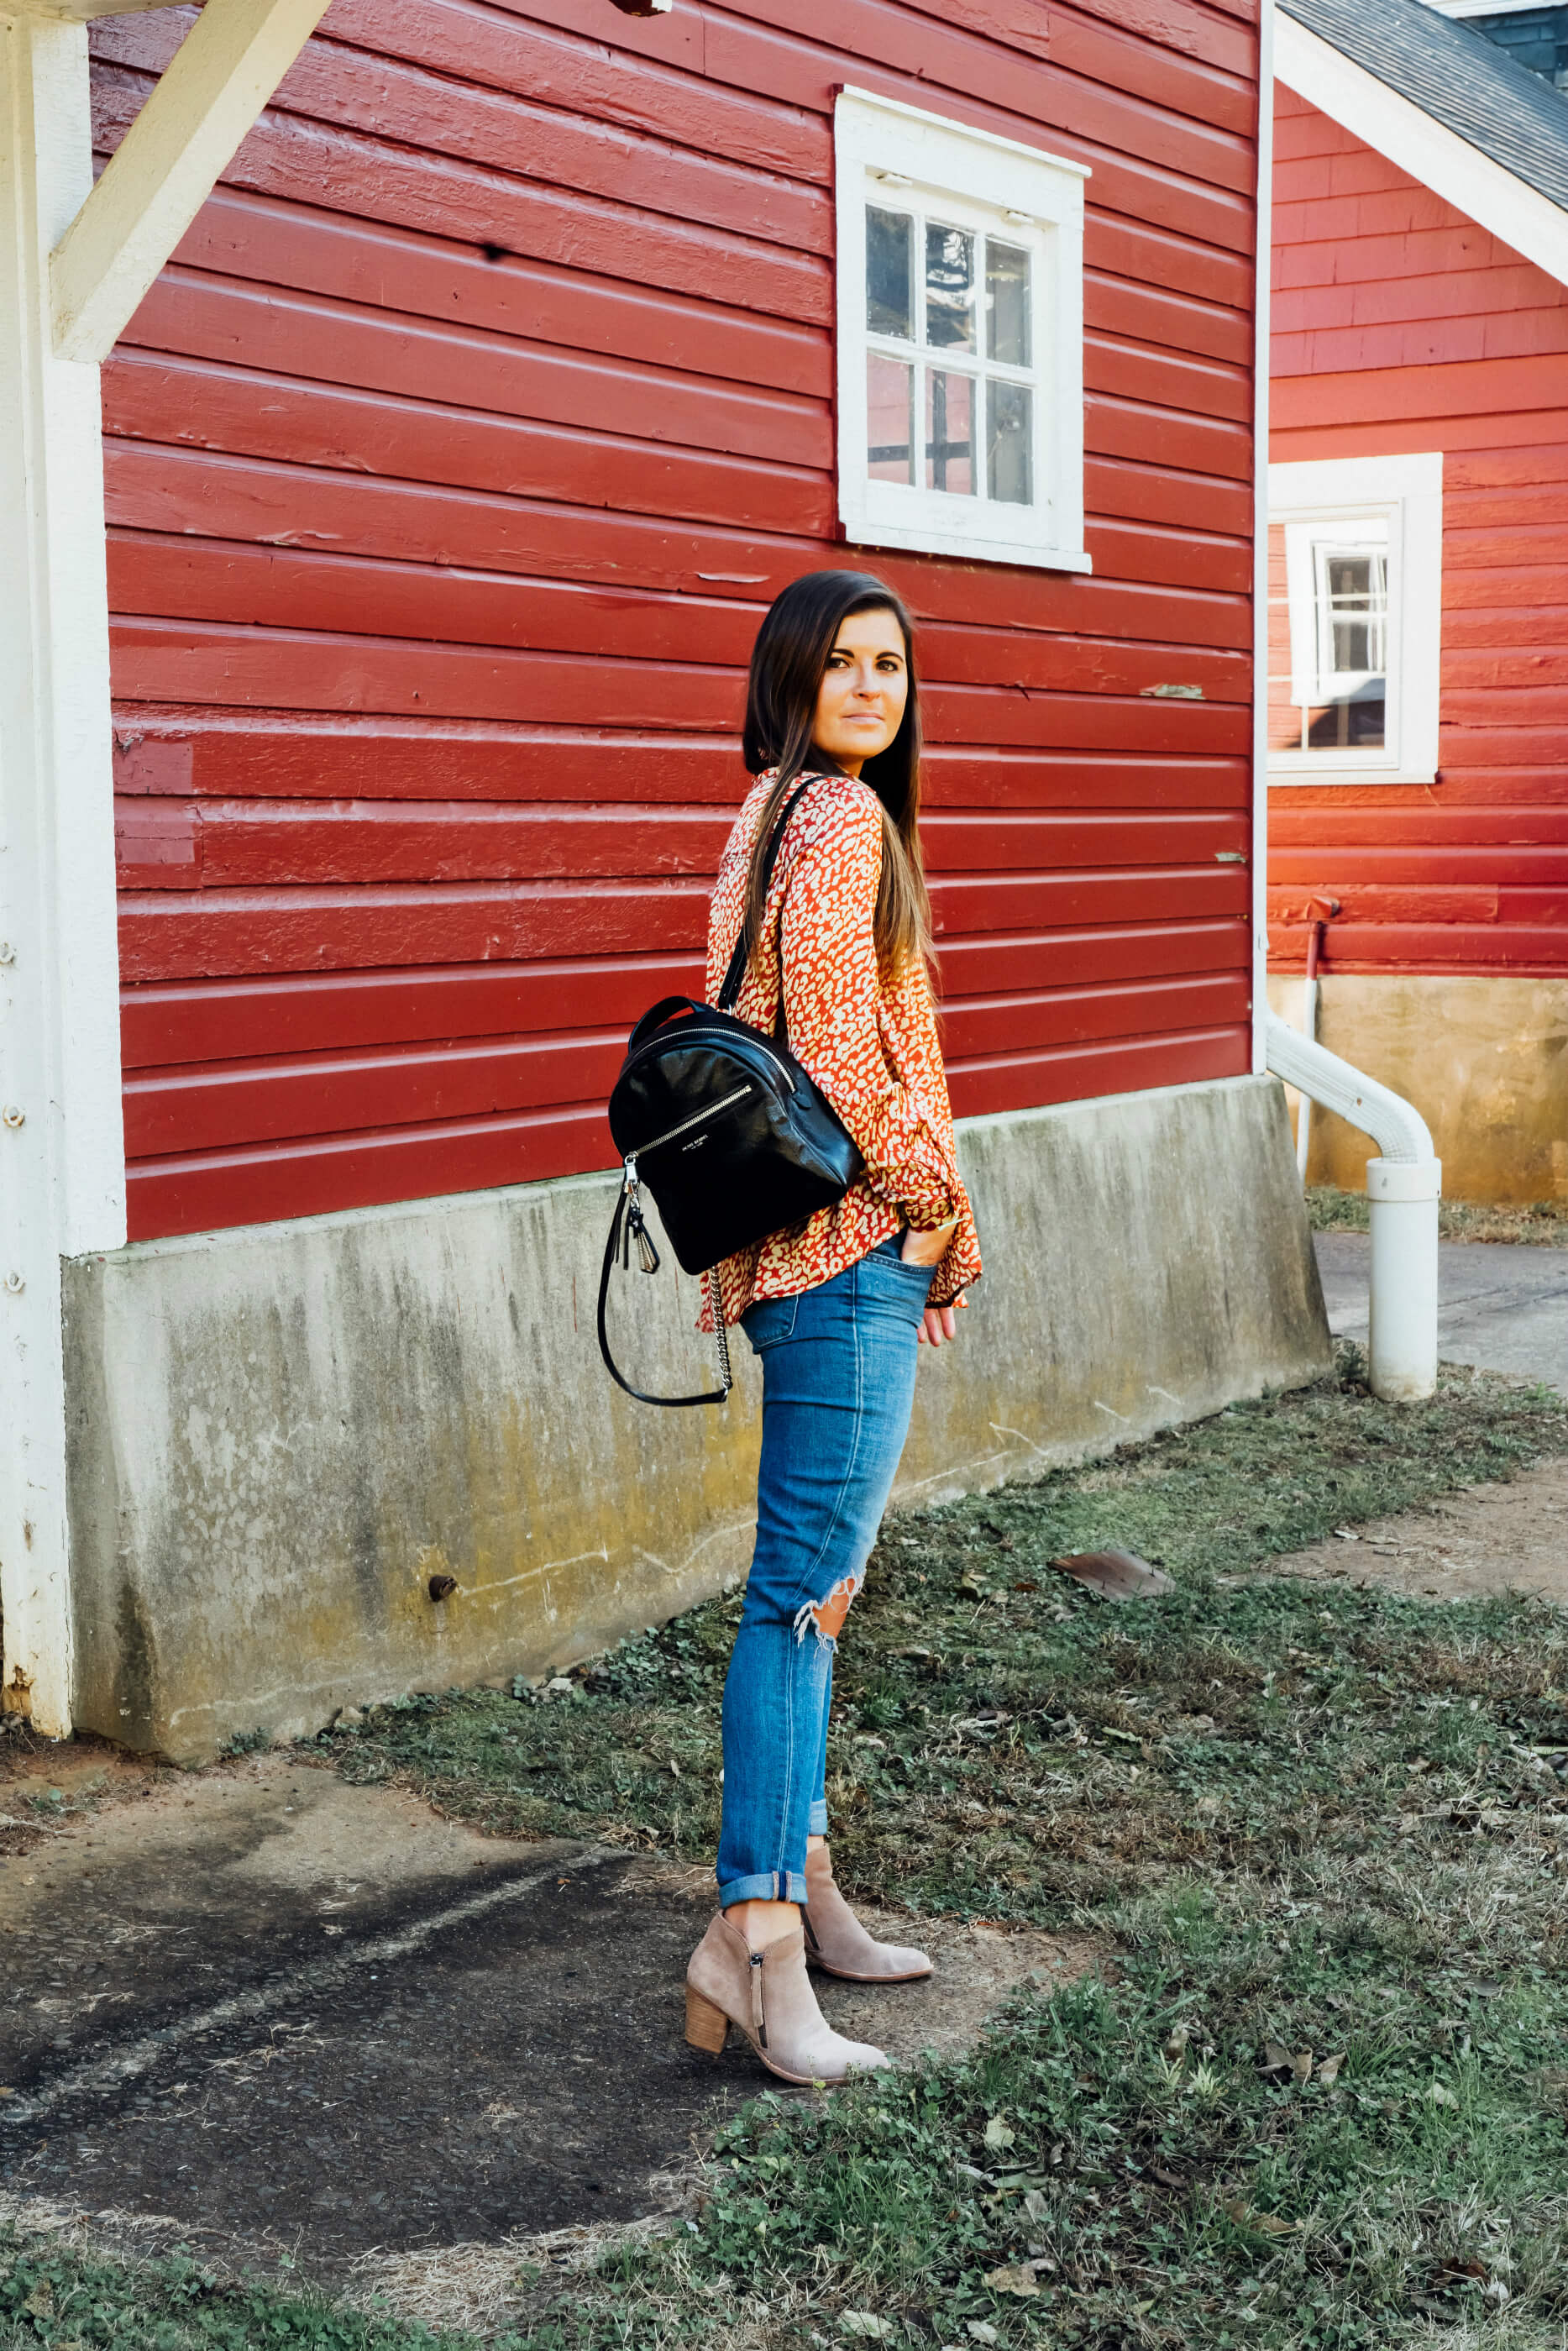 Boohoo Leopard Print Woven Oversized Shirt, Levi's 721 High Rise Distressed Skinny Jeans, Henri Bendel About Town Shimmer Backpack, Fall Outfit, Tilden of To Be Bright